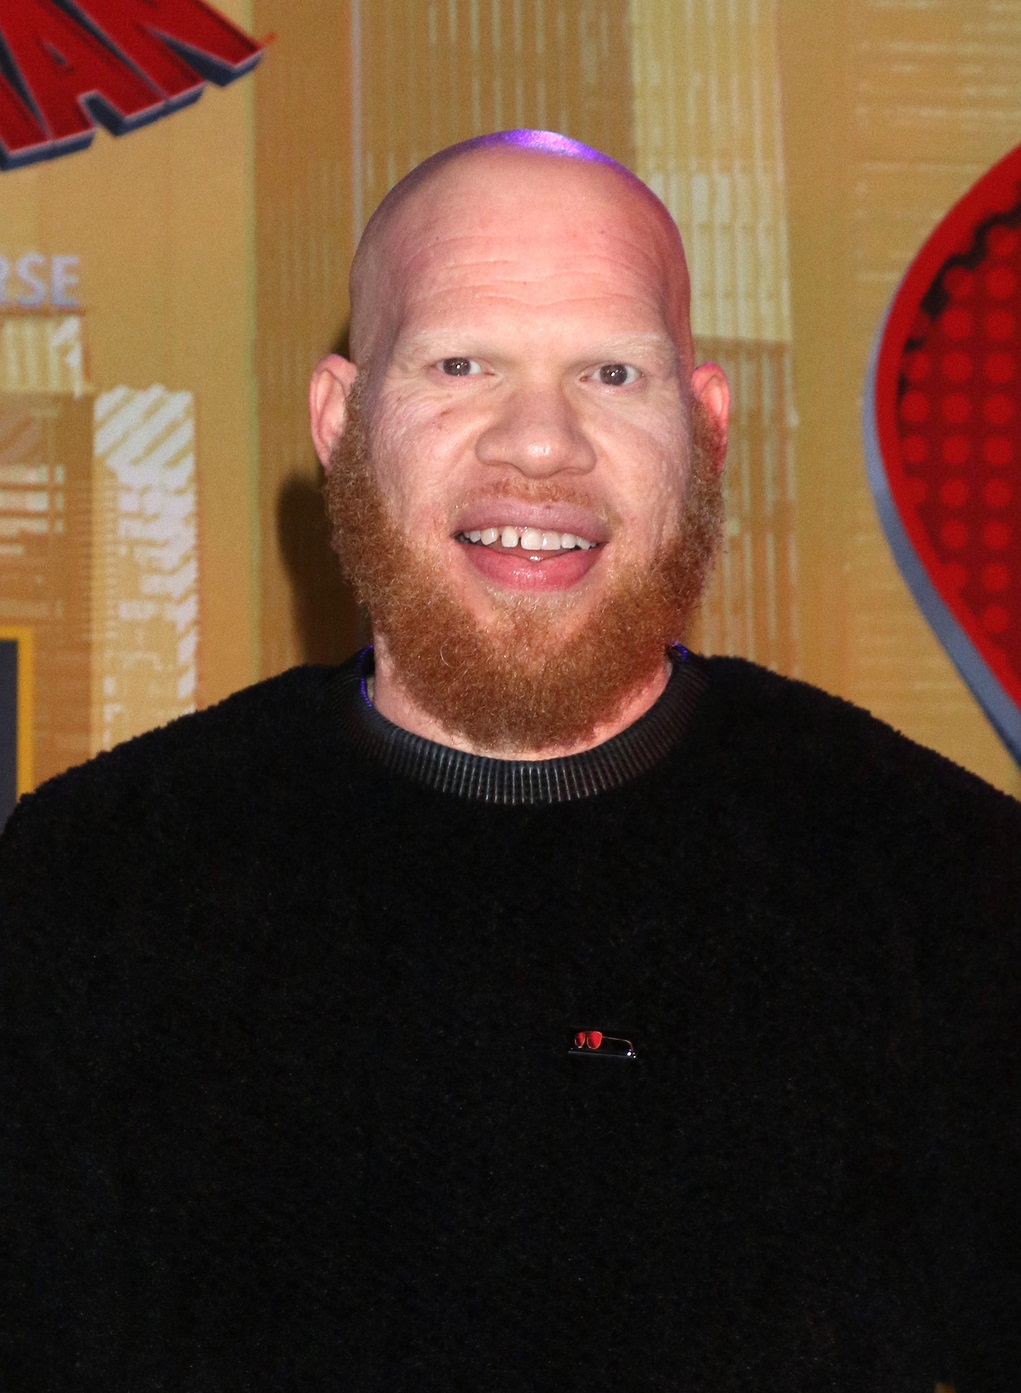 Krondon - Ethnicity of Celebs What Nationality Ancestry Race.